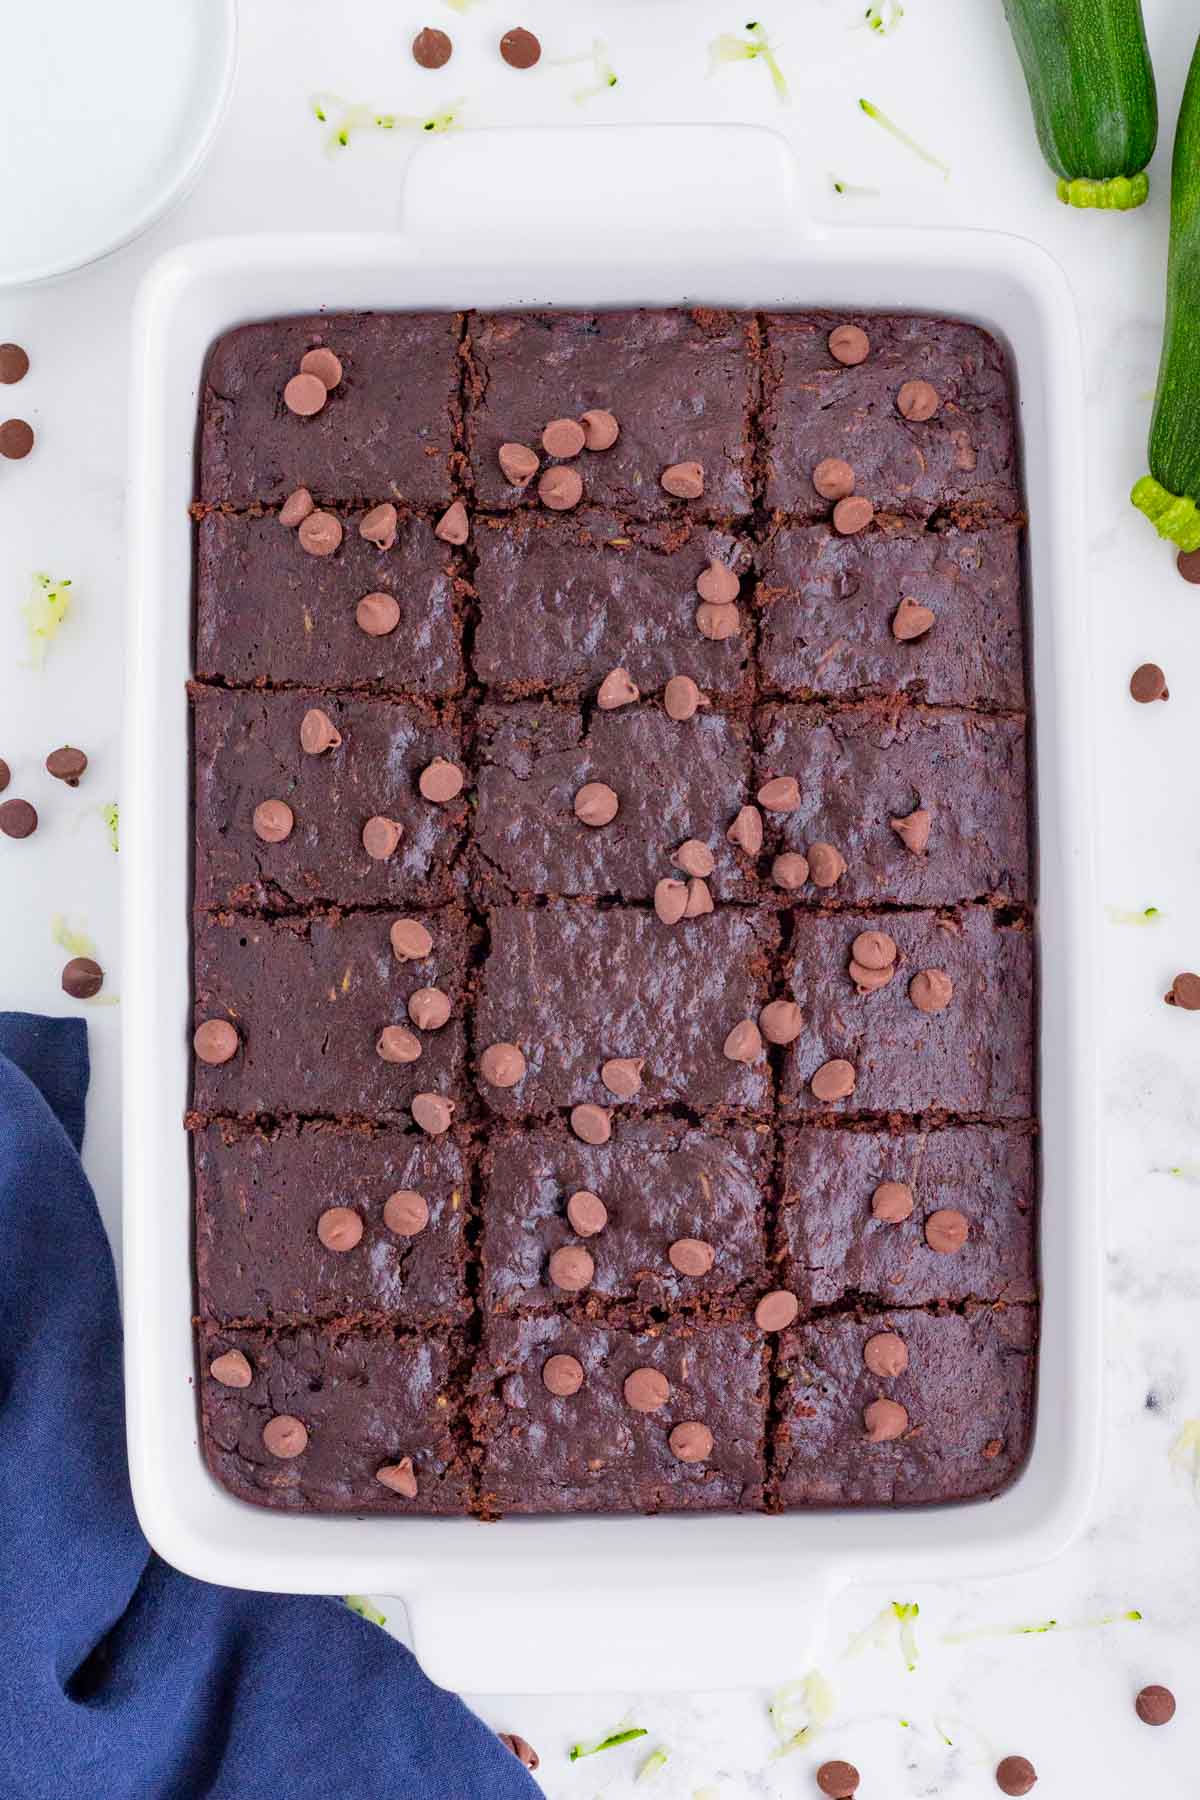 Chocolate zucchini brownies are easy, healthy, full of rich, chocolate flavor.